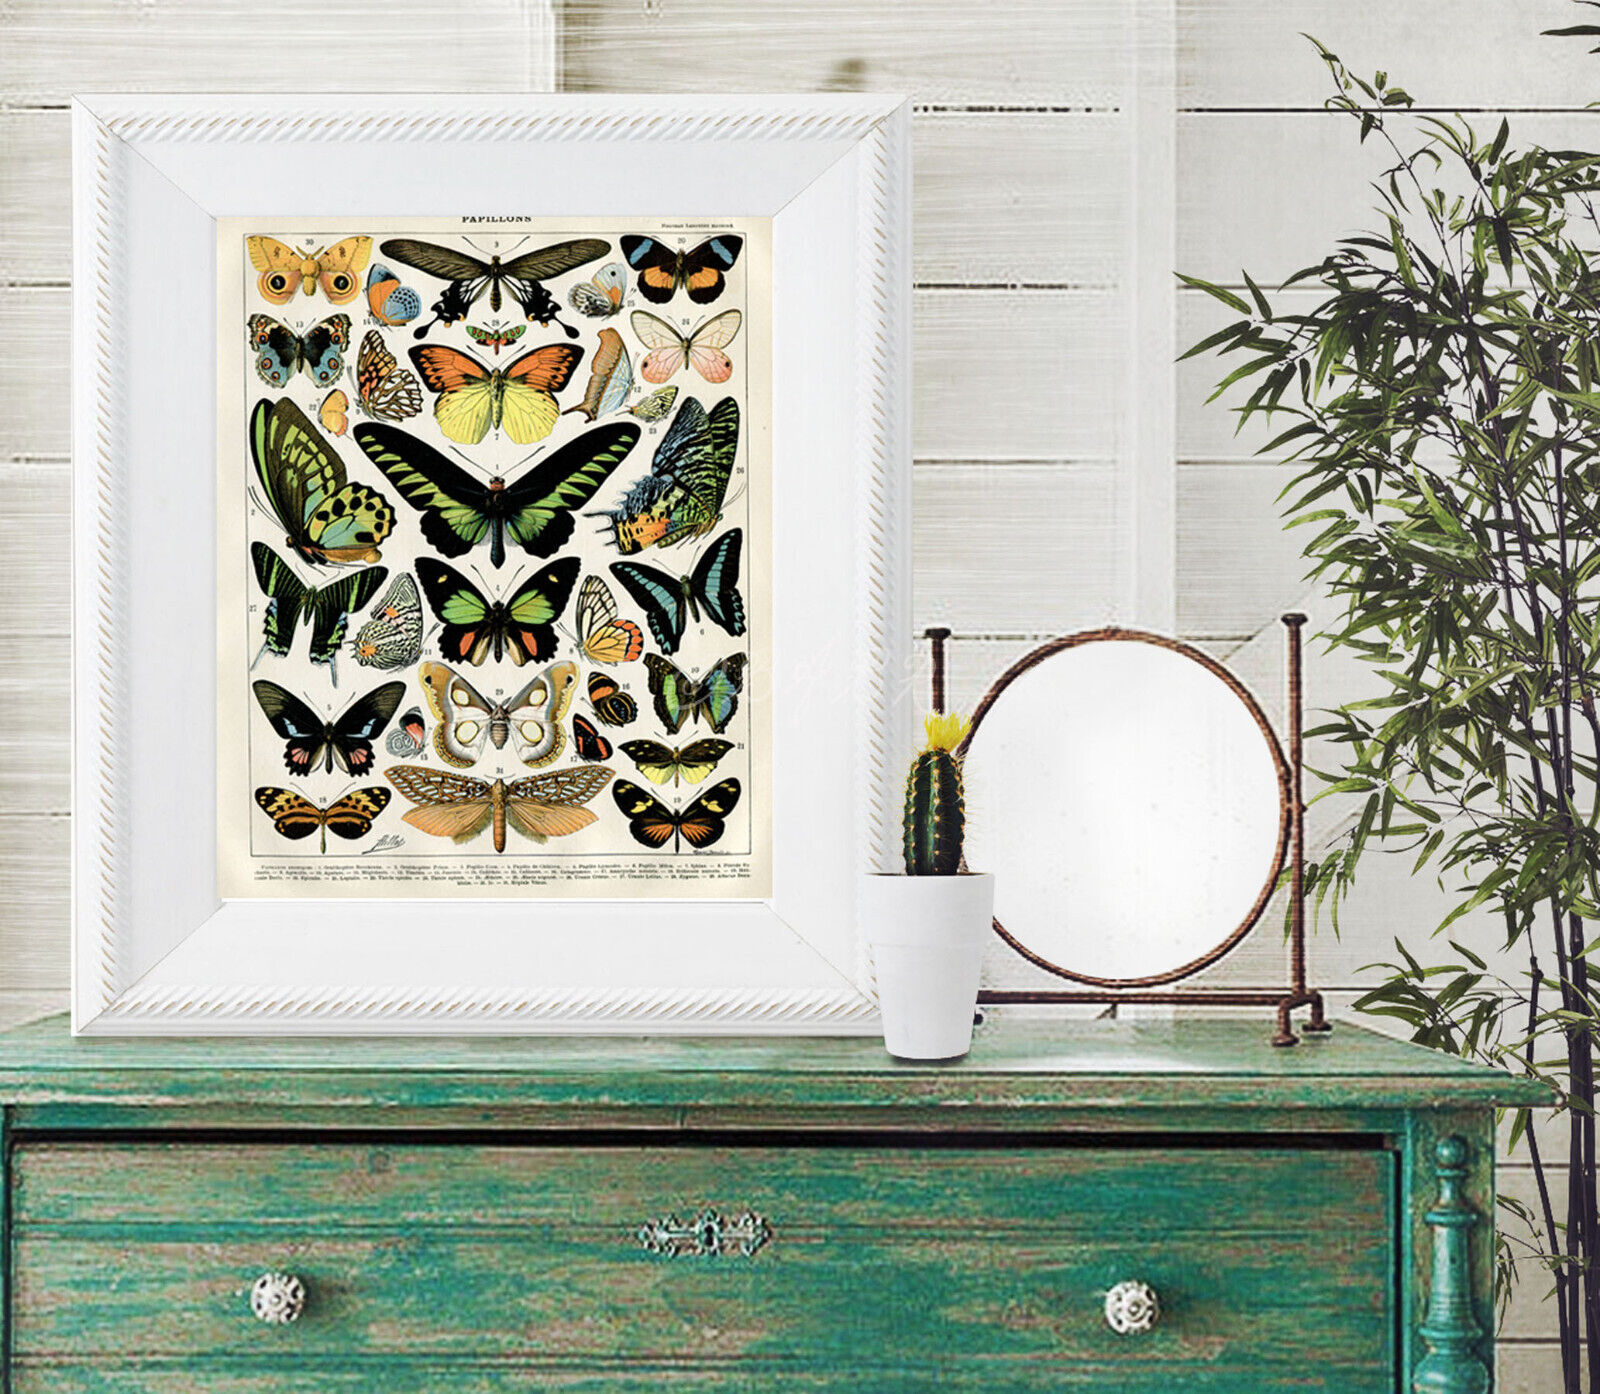 Larousse Colorful Butterflies Butterfly Wall Art Papillon Insects Poster Print